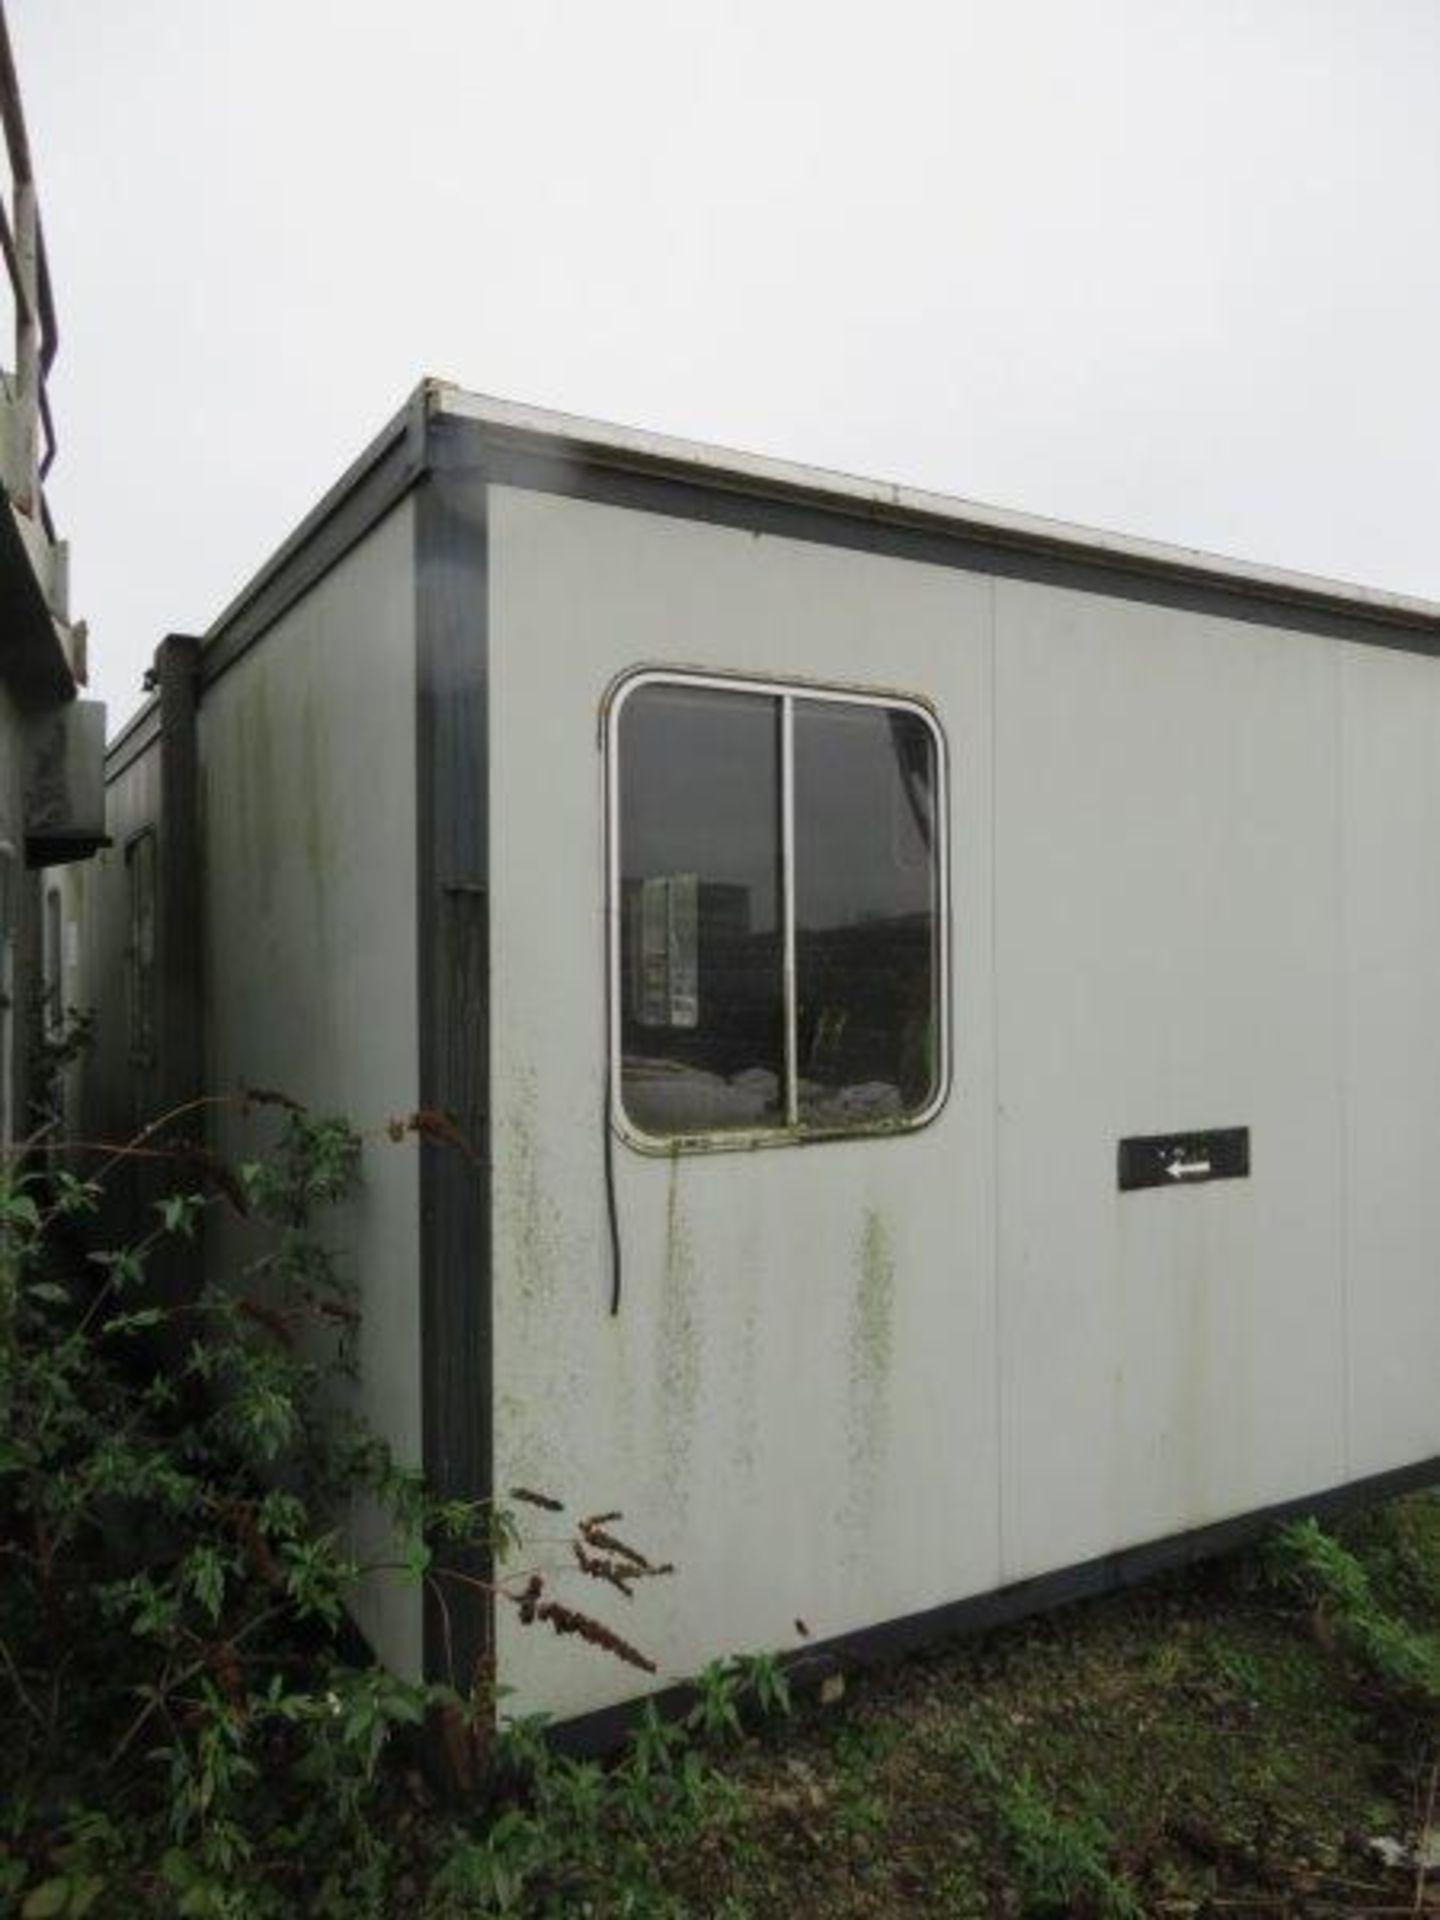 Large Cabin - 10.3M L x 3.1M wide x 2.7M high - LOCATED IN SOUTHAMPTON - OWN COLLECTION PREFERRED - Image 12 of 12